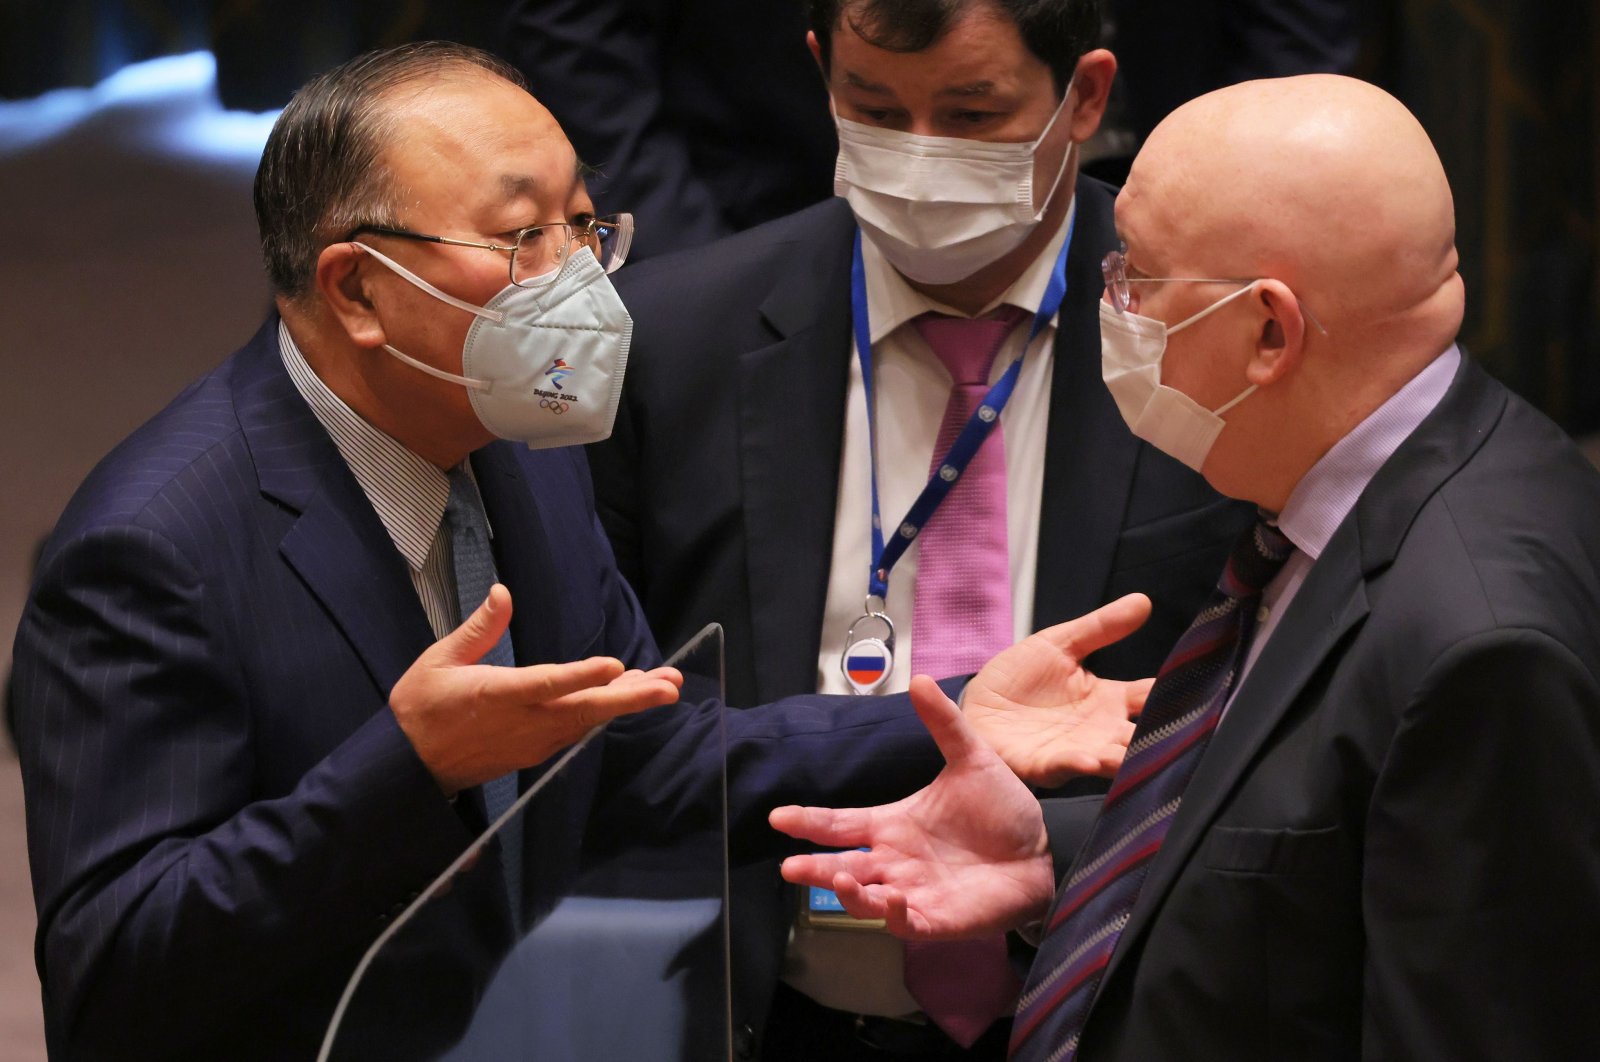 Chinese Ambassador Zhang Jun and Russian Ambassador Vasily Nebenzia speak before the start of a meeting to discuss the humanitarian crisis in Ukraine at the United Nations headquarters in New York, U.S., March 7, 2022. (AFP Photo)